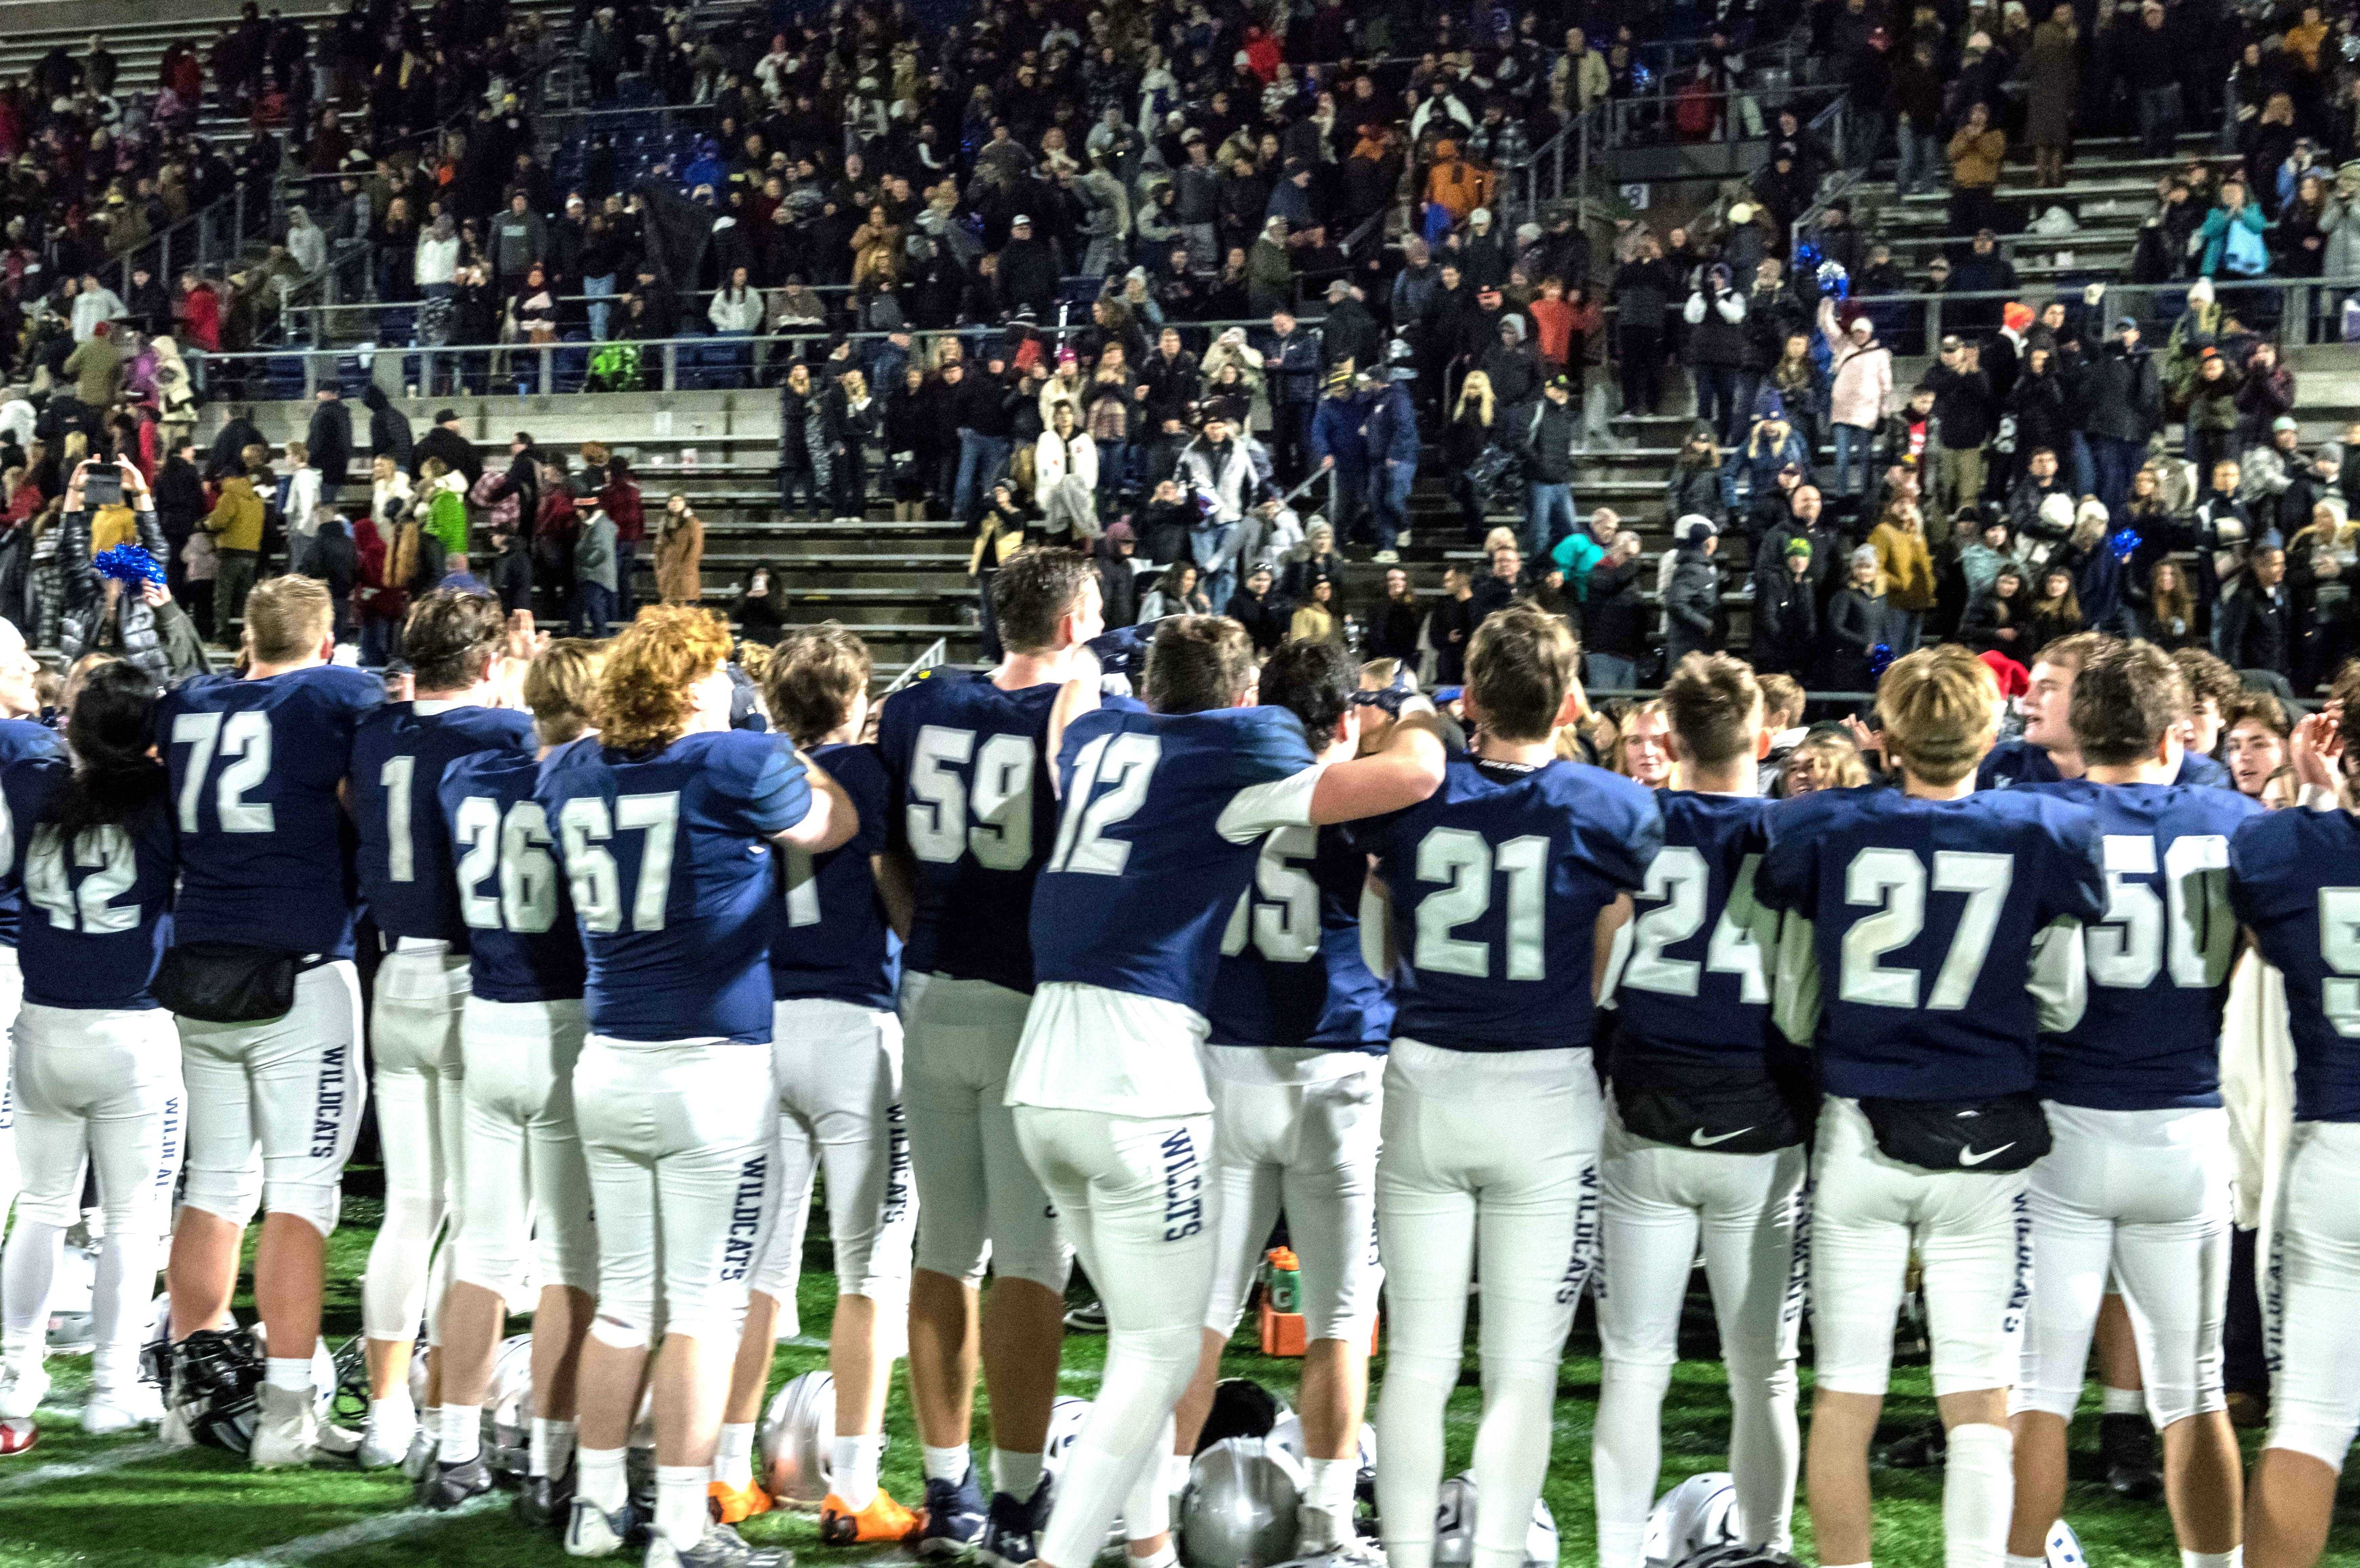 Wilsonville players celebrate with their fans after beating Mountain View in the 5A final in November. (Photo by Greg Artman)